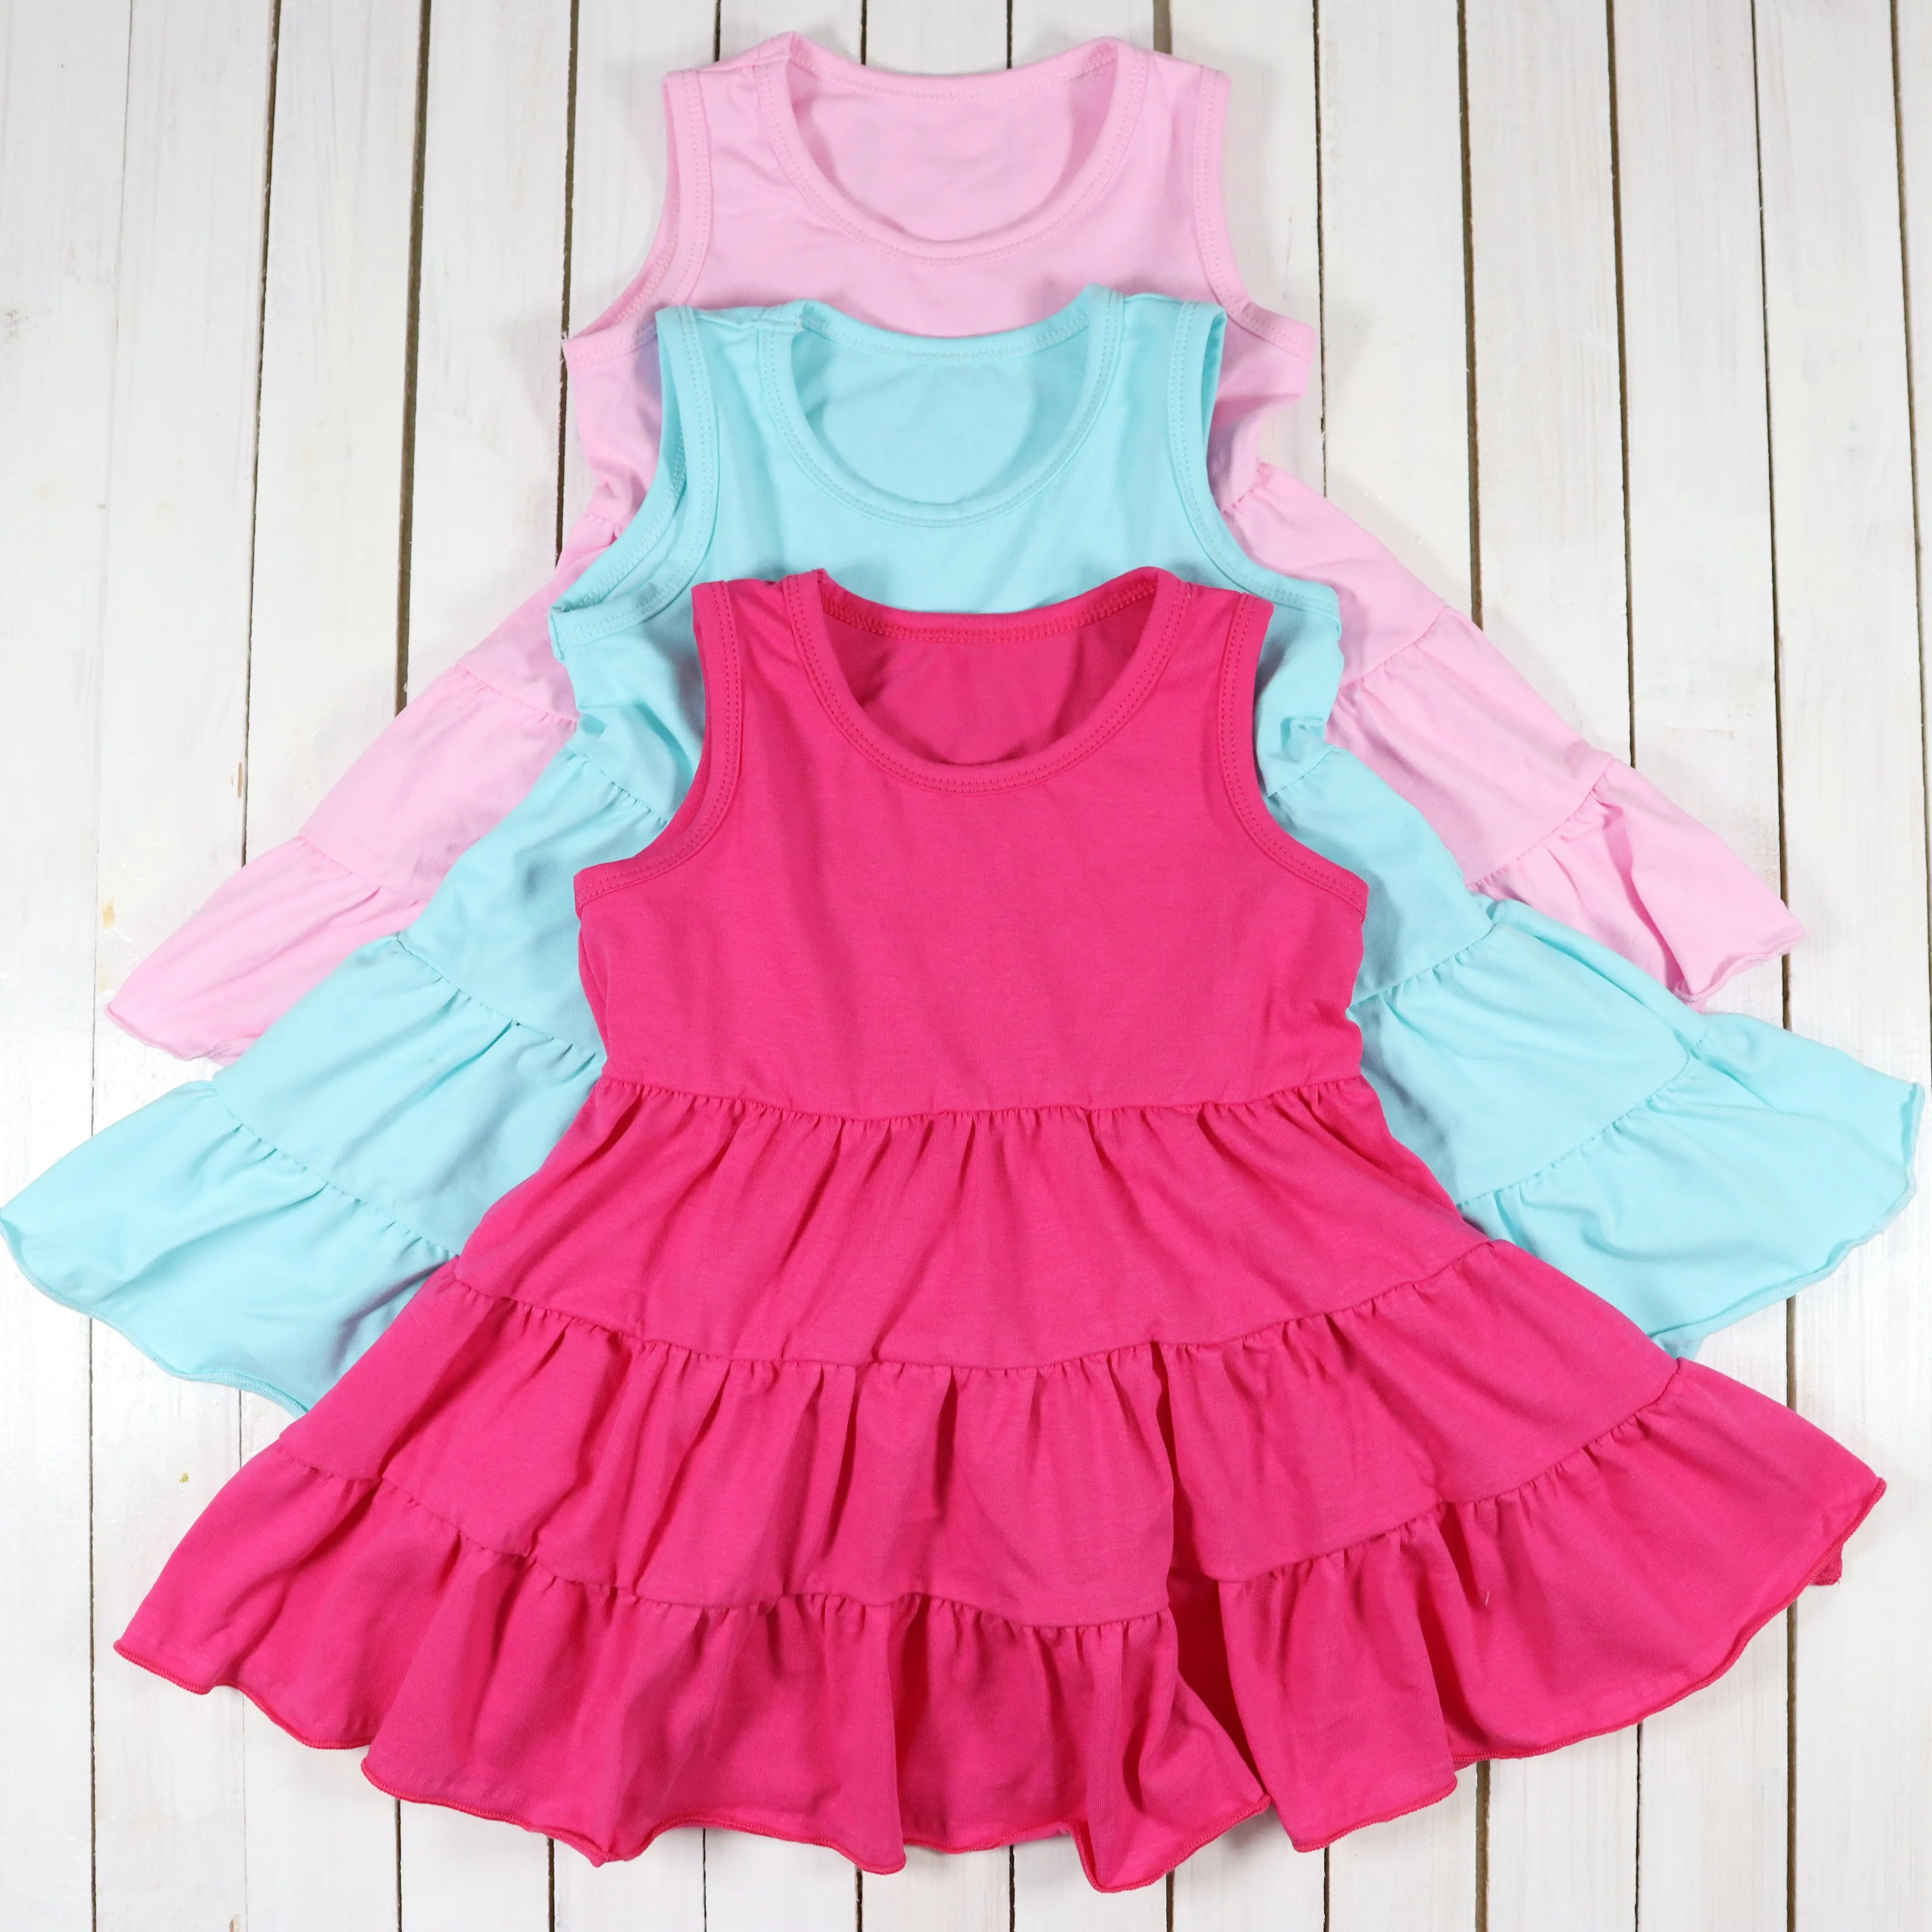 Casual Short Sleeveless Best Quality Clothing For Infant Babies New Style Cotton Children Clothes Dresses Wholesale Baby Girl